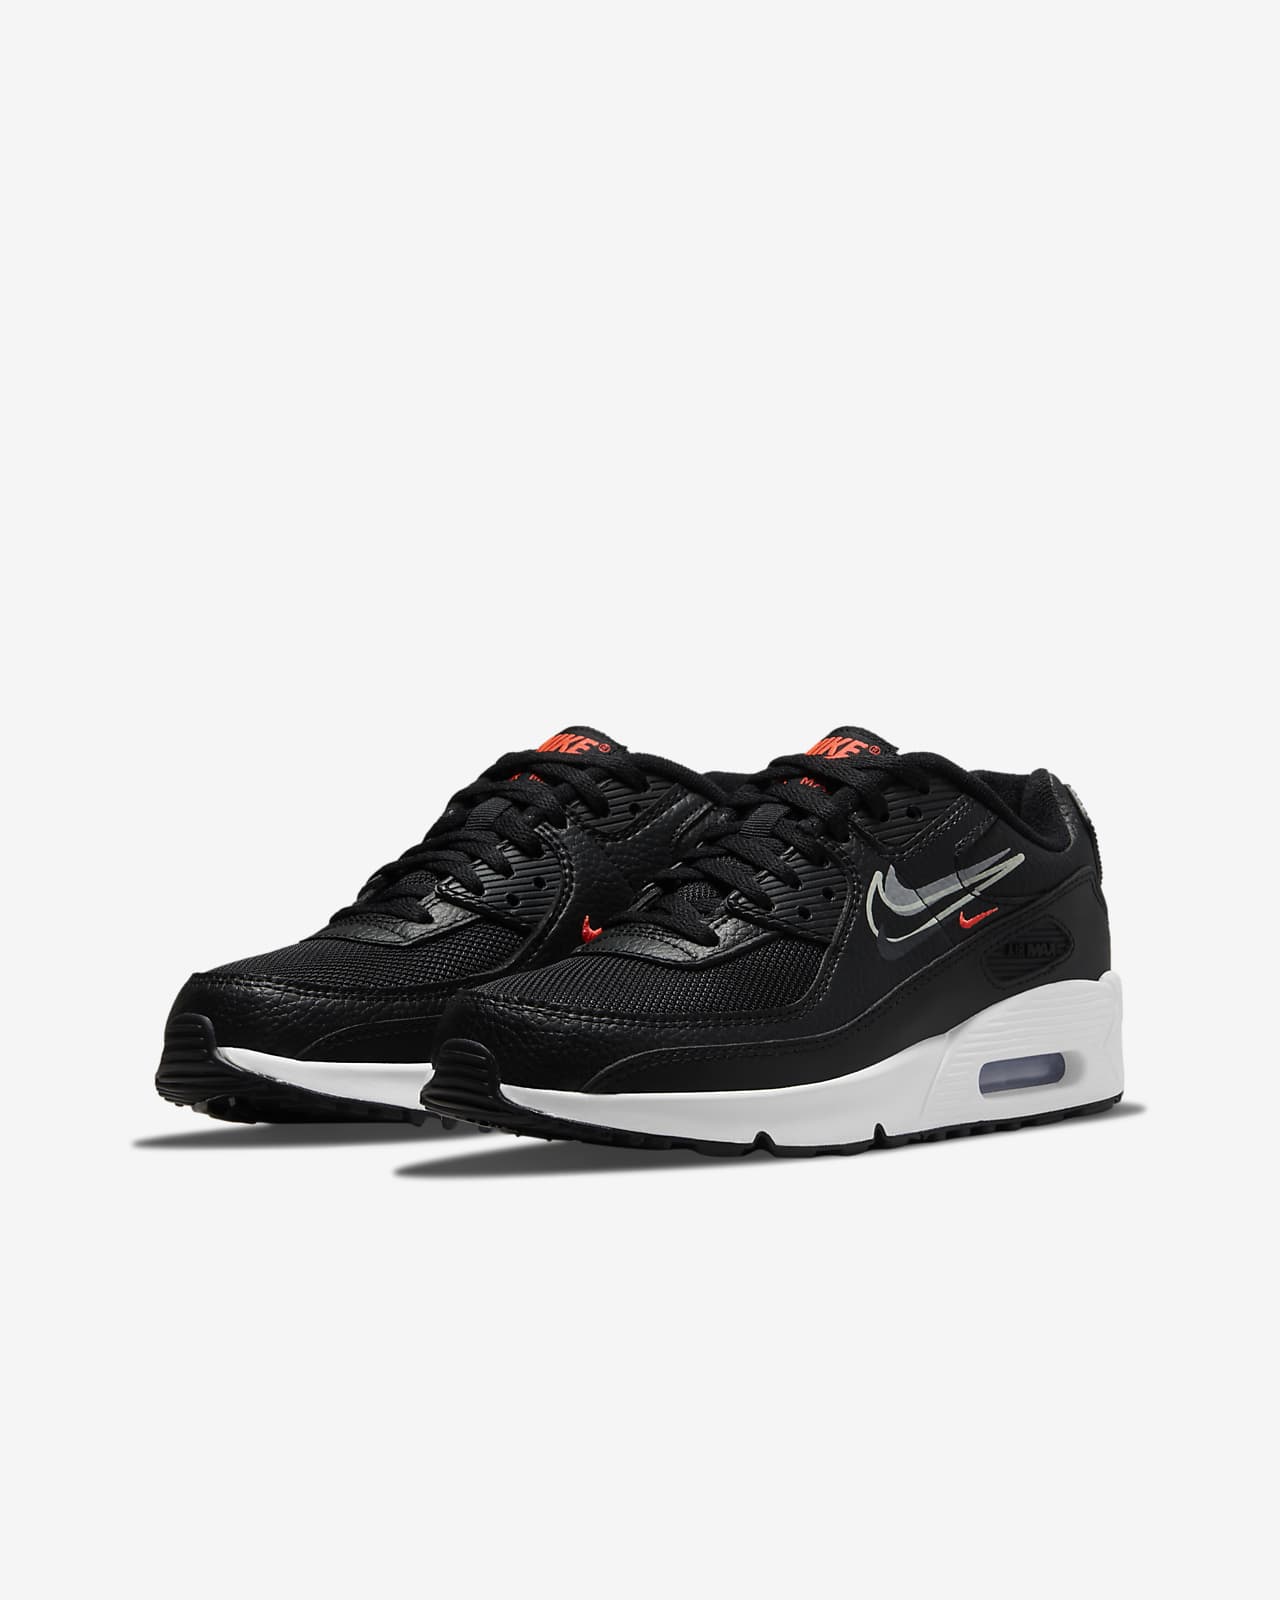 Nike Boys Air Max 90 - Running Shoes Black/White/Red Size 05.5